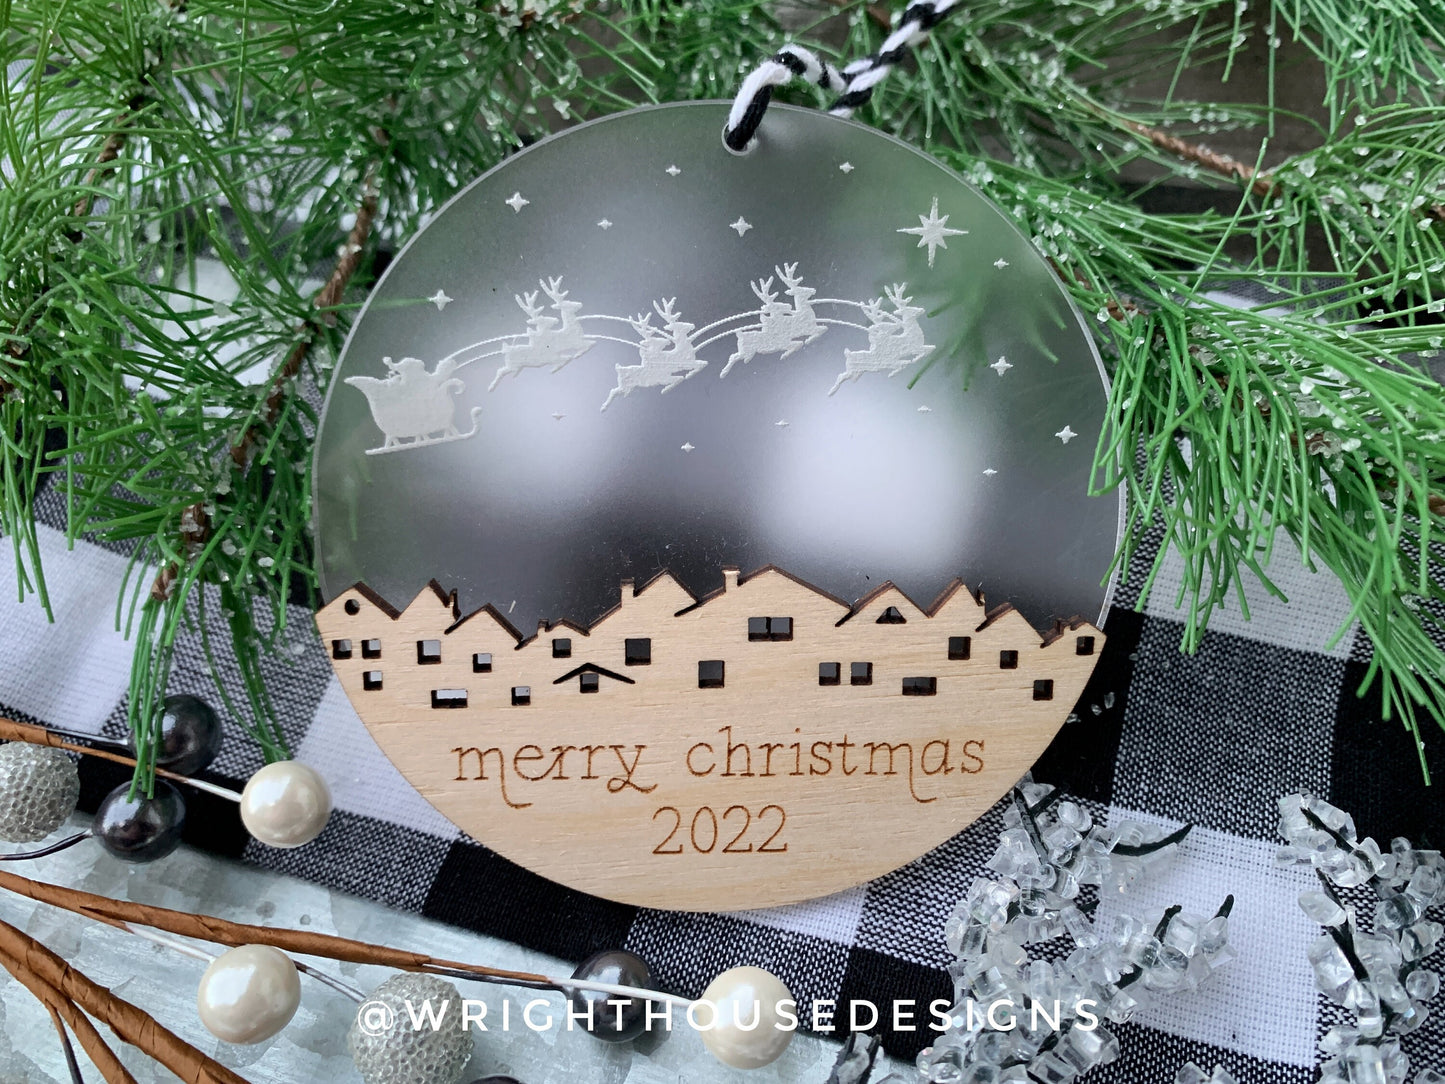 Santa’s Sleigh - Cityscape Winter Sky Scene - Yearly Christmas Eve Tree Ornament - Layered Wood and Acrylic - Stocking Tag - Holiday Decor